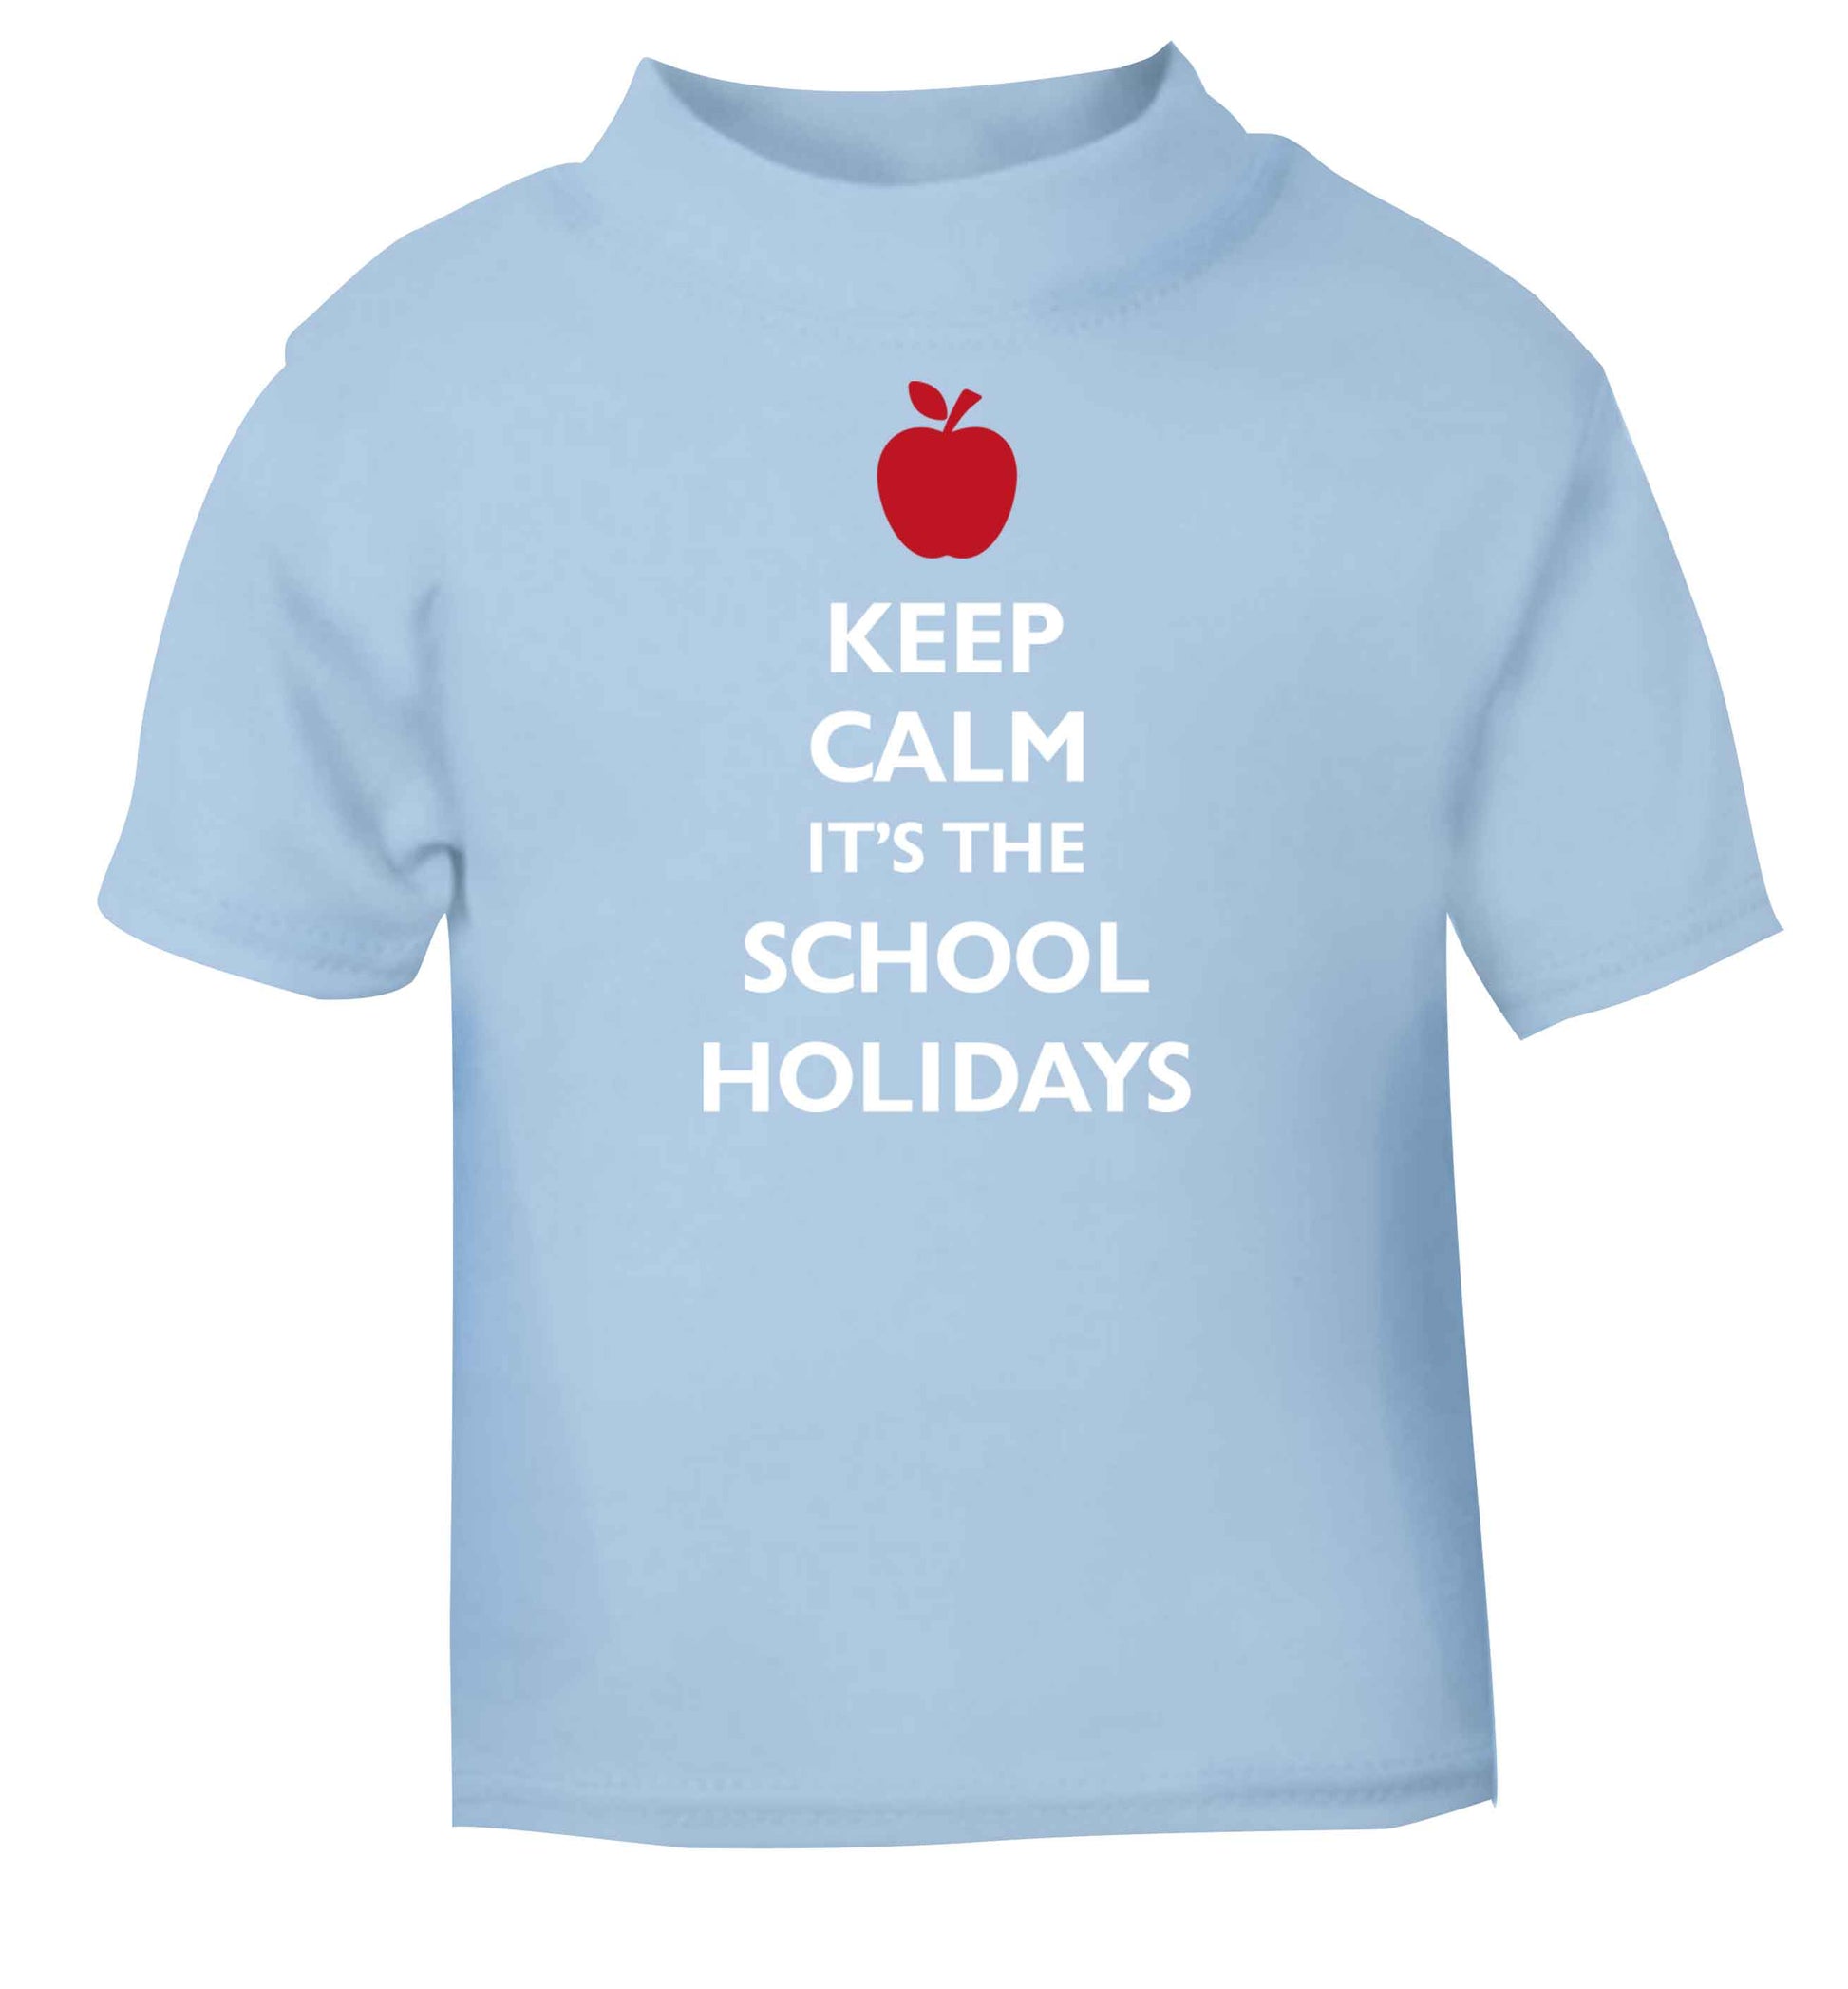 Keep calm it's the school holidays light blue baby toddler Tshirt 2 Years